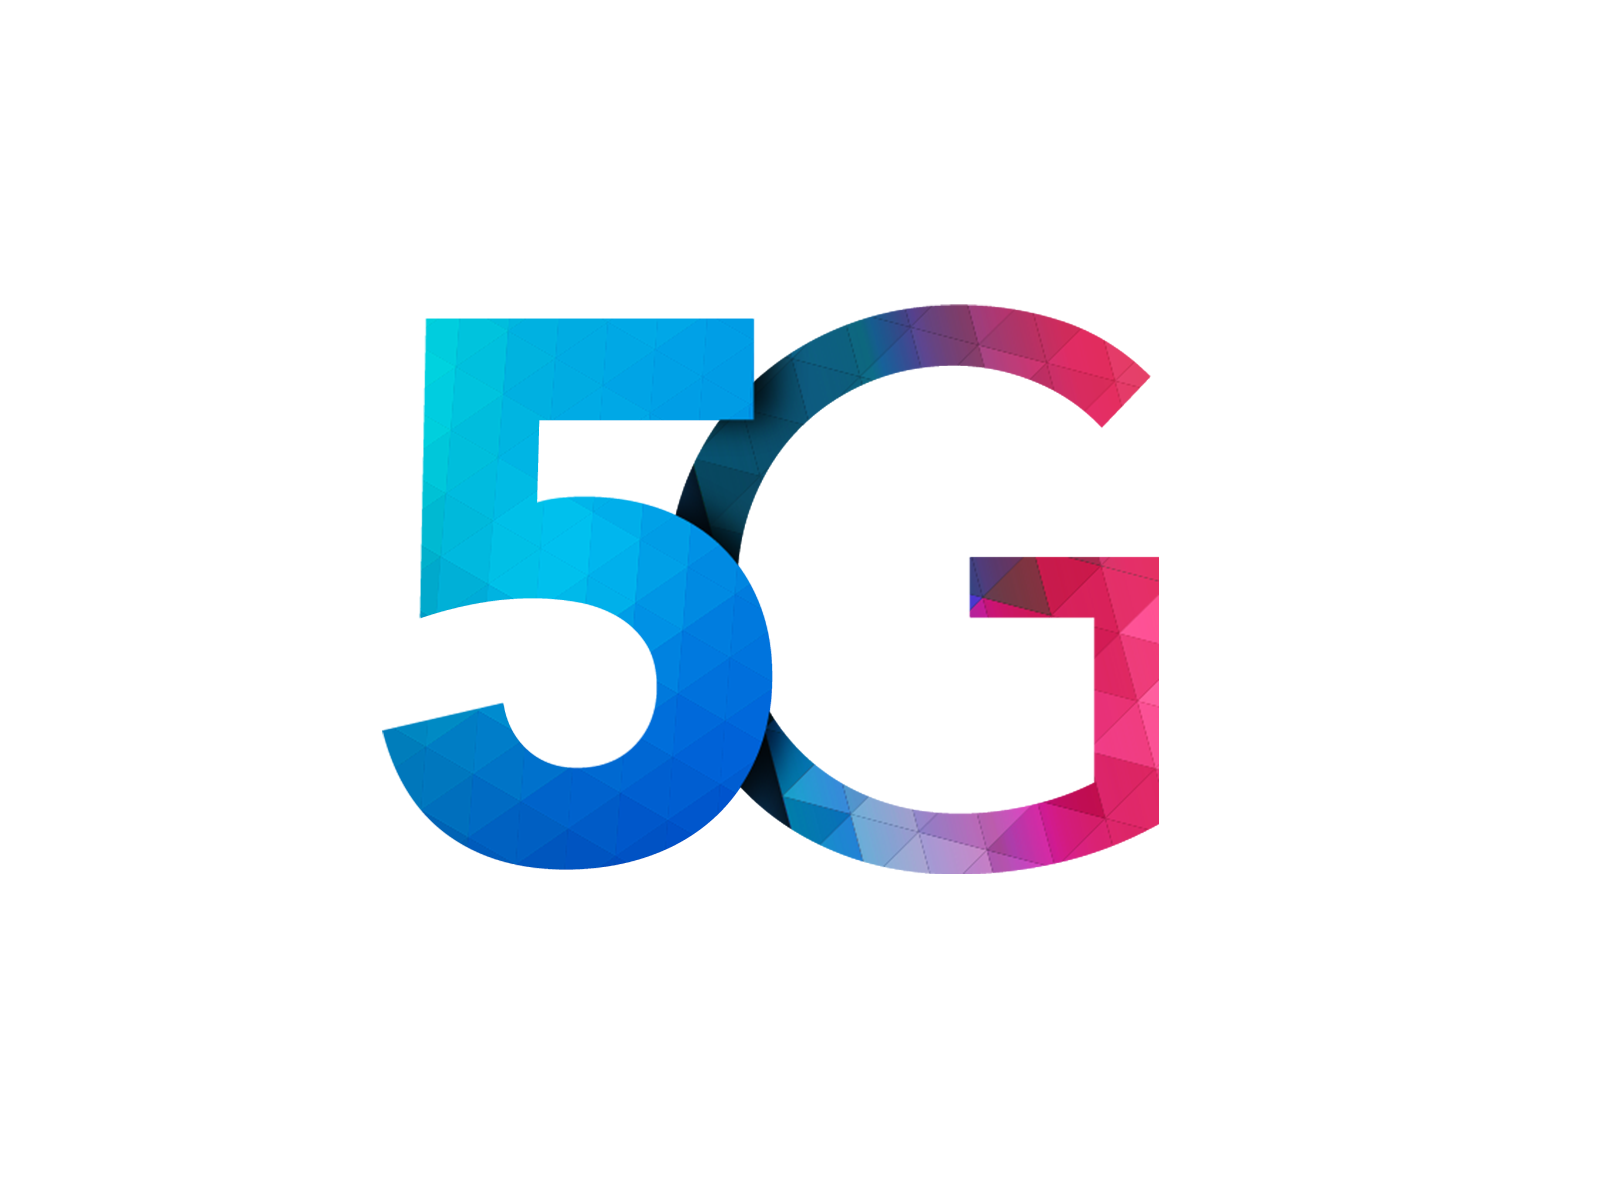 Airtel 5G Plus now live in 7 cities of Andhra Pradesh - Mobility India